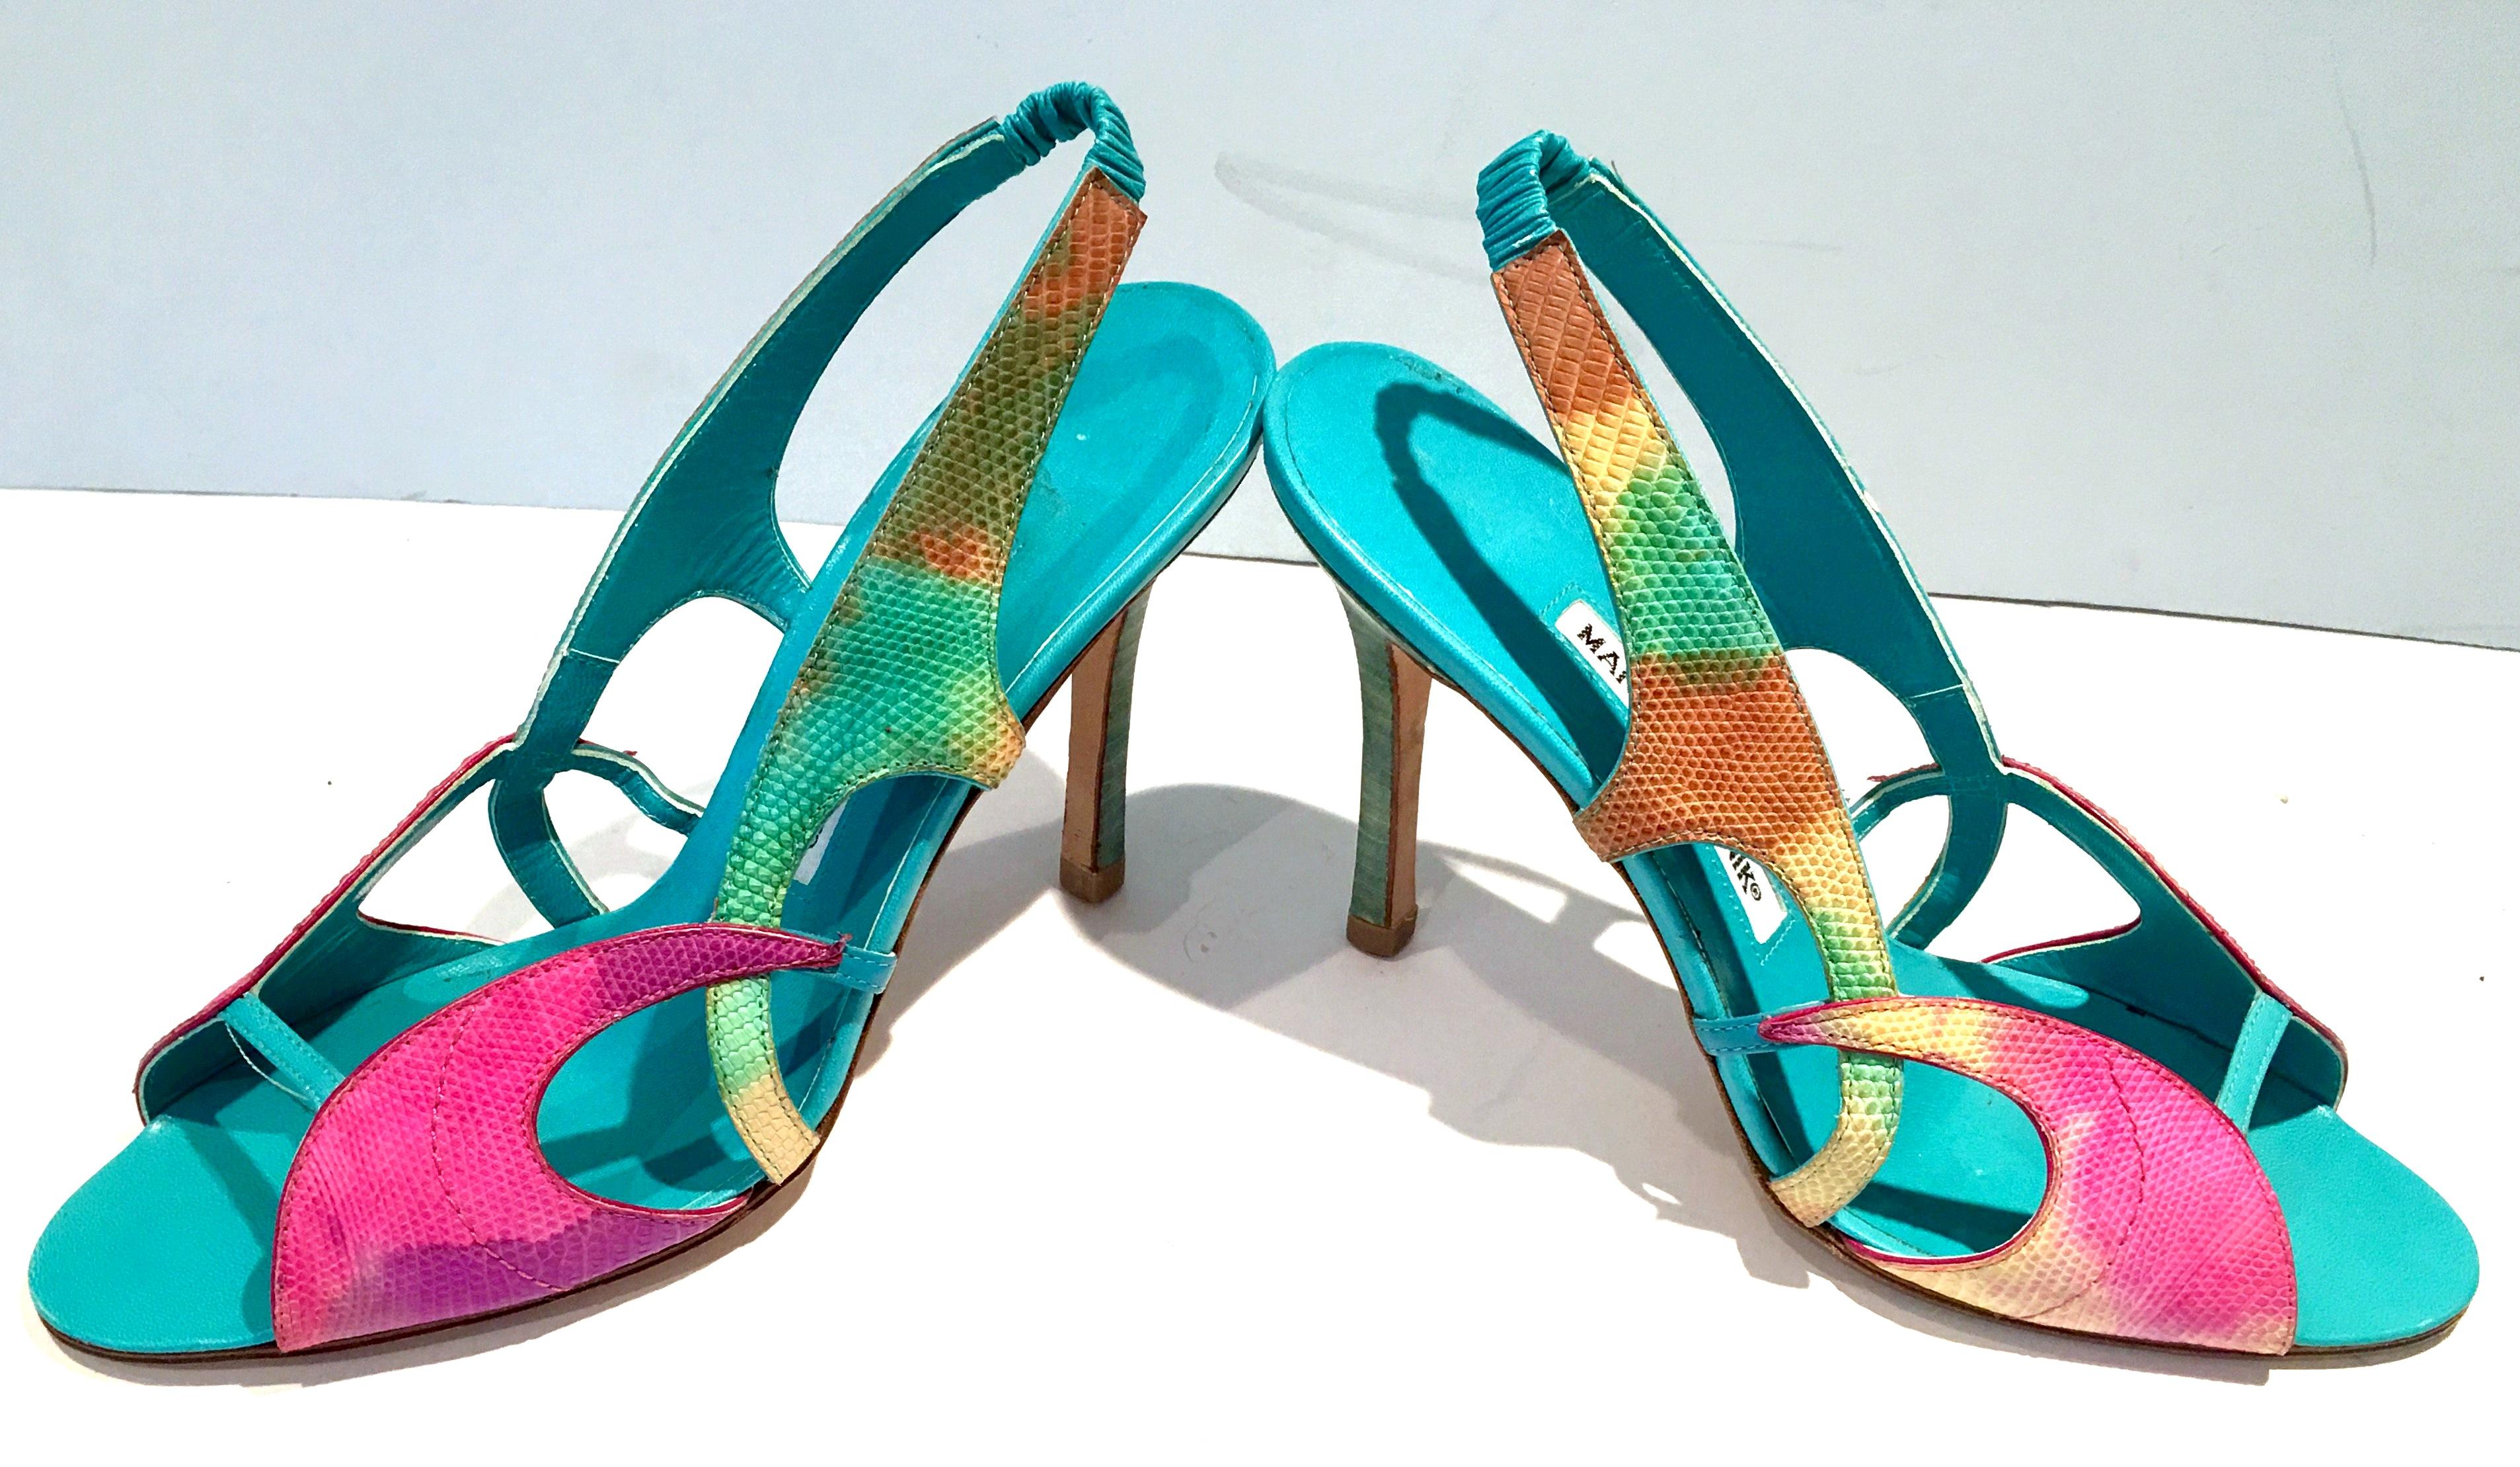 21st Century & New Manolo Blahnik 2013 Collection sling back python sandal shoes.These python dyed shoes are executed in a vibrant turquoise ground, accented with fuchsia, pistachio green, yellow, orange-multi. Pistachio green wood grain stained